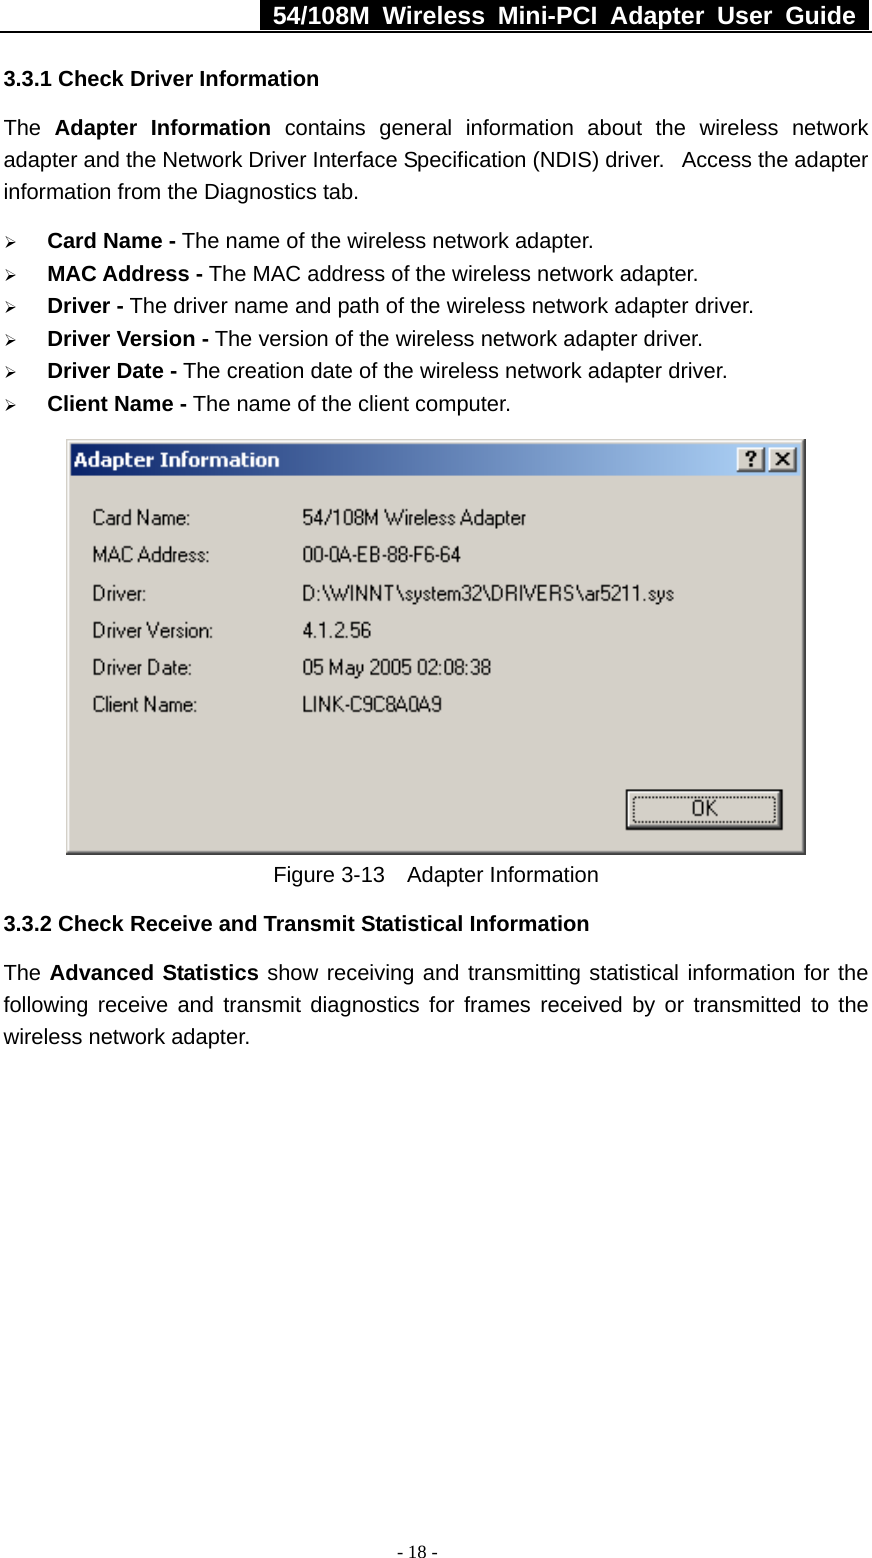   54/108M Wireless Mini-PCI Adapter User Guide  - 18 - 3.3.1 Check Driver Information The  Adapter Information contains general information about the wireless network adapter and the Network Driver Interface Specification (NDIS) driver.   Access the adapter information from the Diagnostics tab. ¾ Card Name - The name of the wireless network adapter.   ¾ MAC Address - The MAC address of the wireless network adapter.   ¾ Driver - The driver name and path of the wireless network adapter driver. ¾ Driver Version - The version of the wireless network adapter driver. ¾ Driver Date - The creation date of the wireless network adapter driver. ¾ Client Name - The name of the client computer.    Figure 3-13  Adapter Information 3.3.2 Check Receive and Transmit Statistical Information The Advanced Statistics show receiving and transmitting statistical information for the following receive and transmit diagnostics for frames received by or transmitted to the wireless network adapter. 